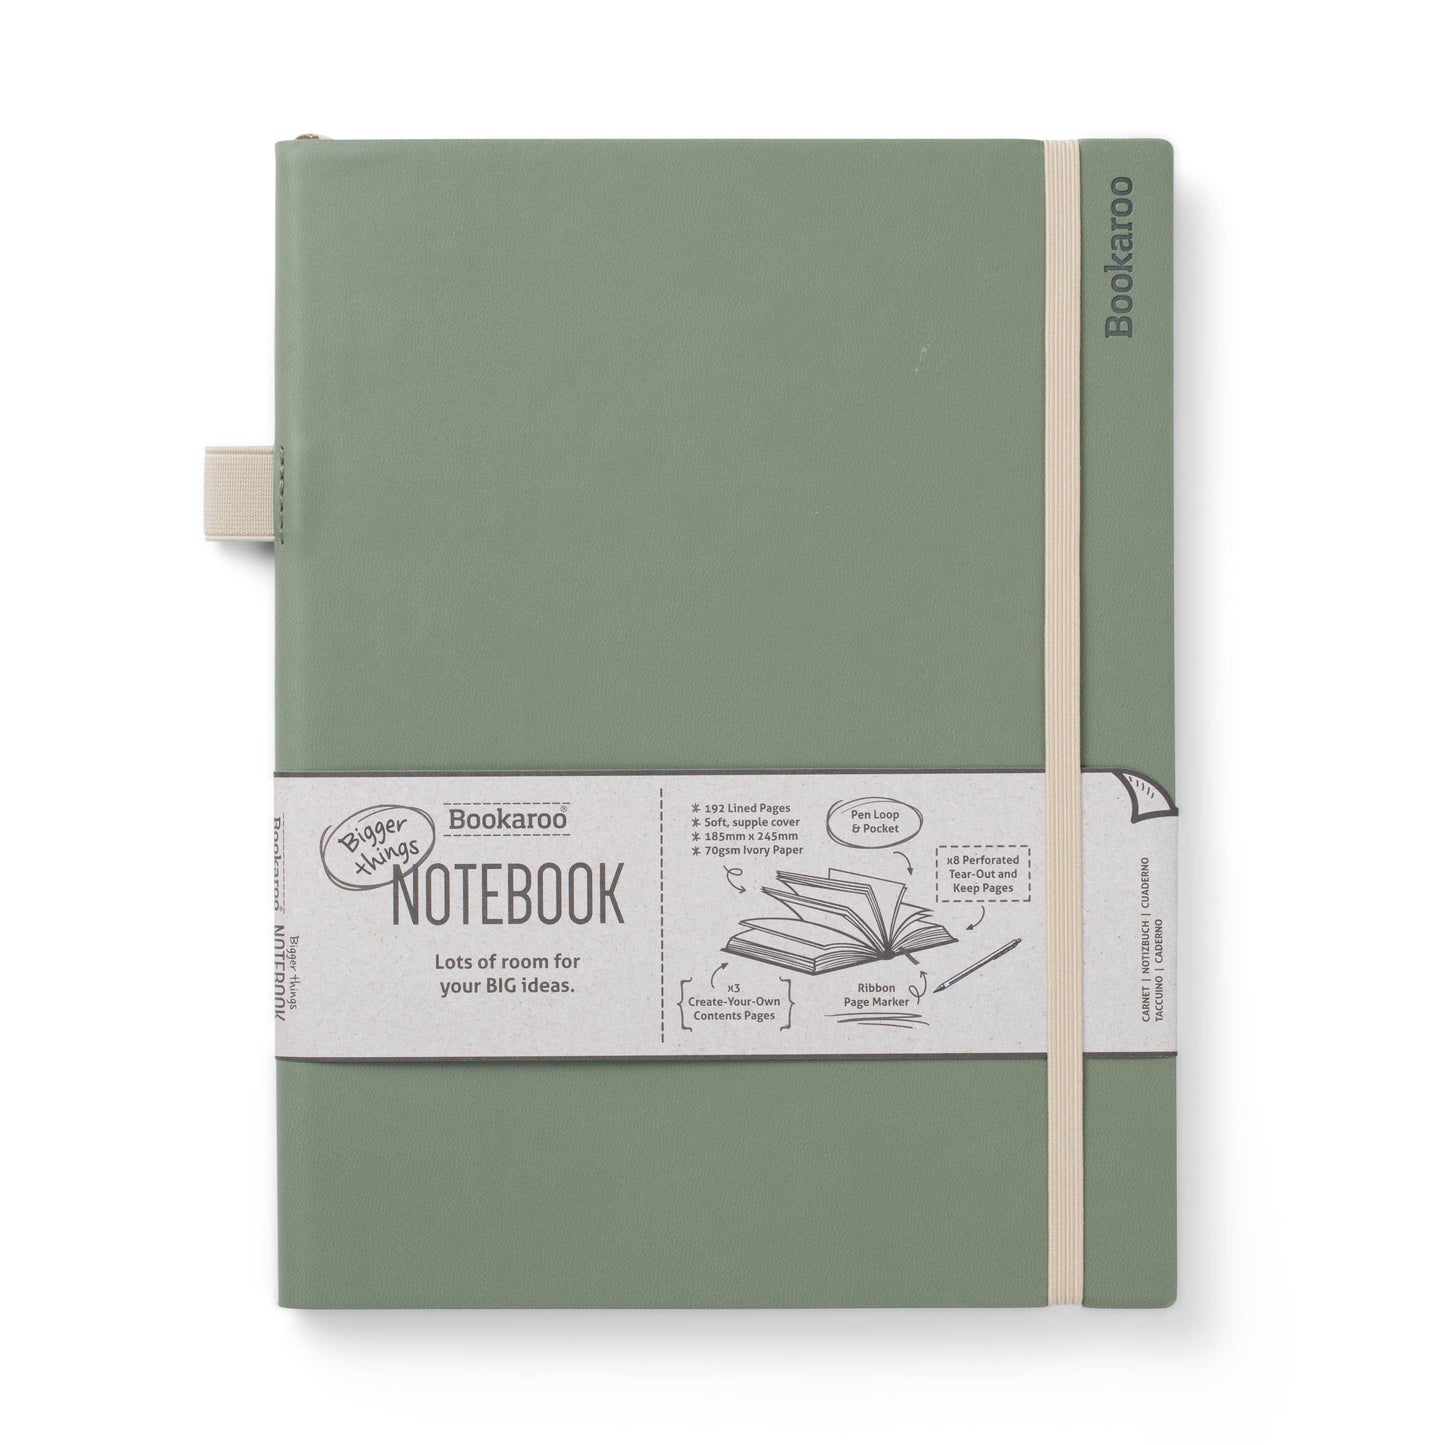 Bookaroo Bigger Things Notebook: Forest Green